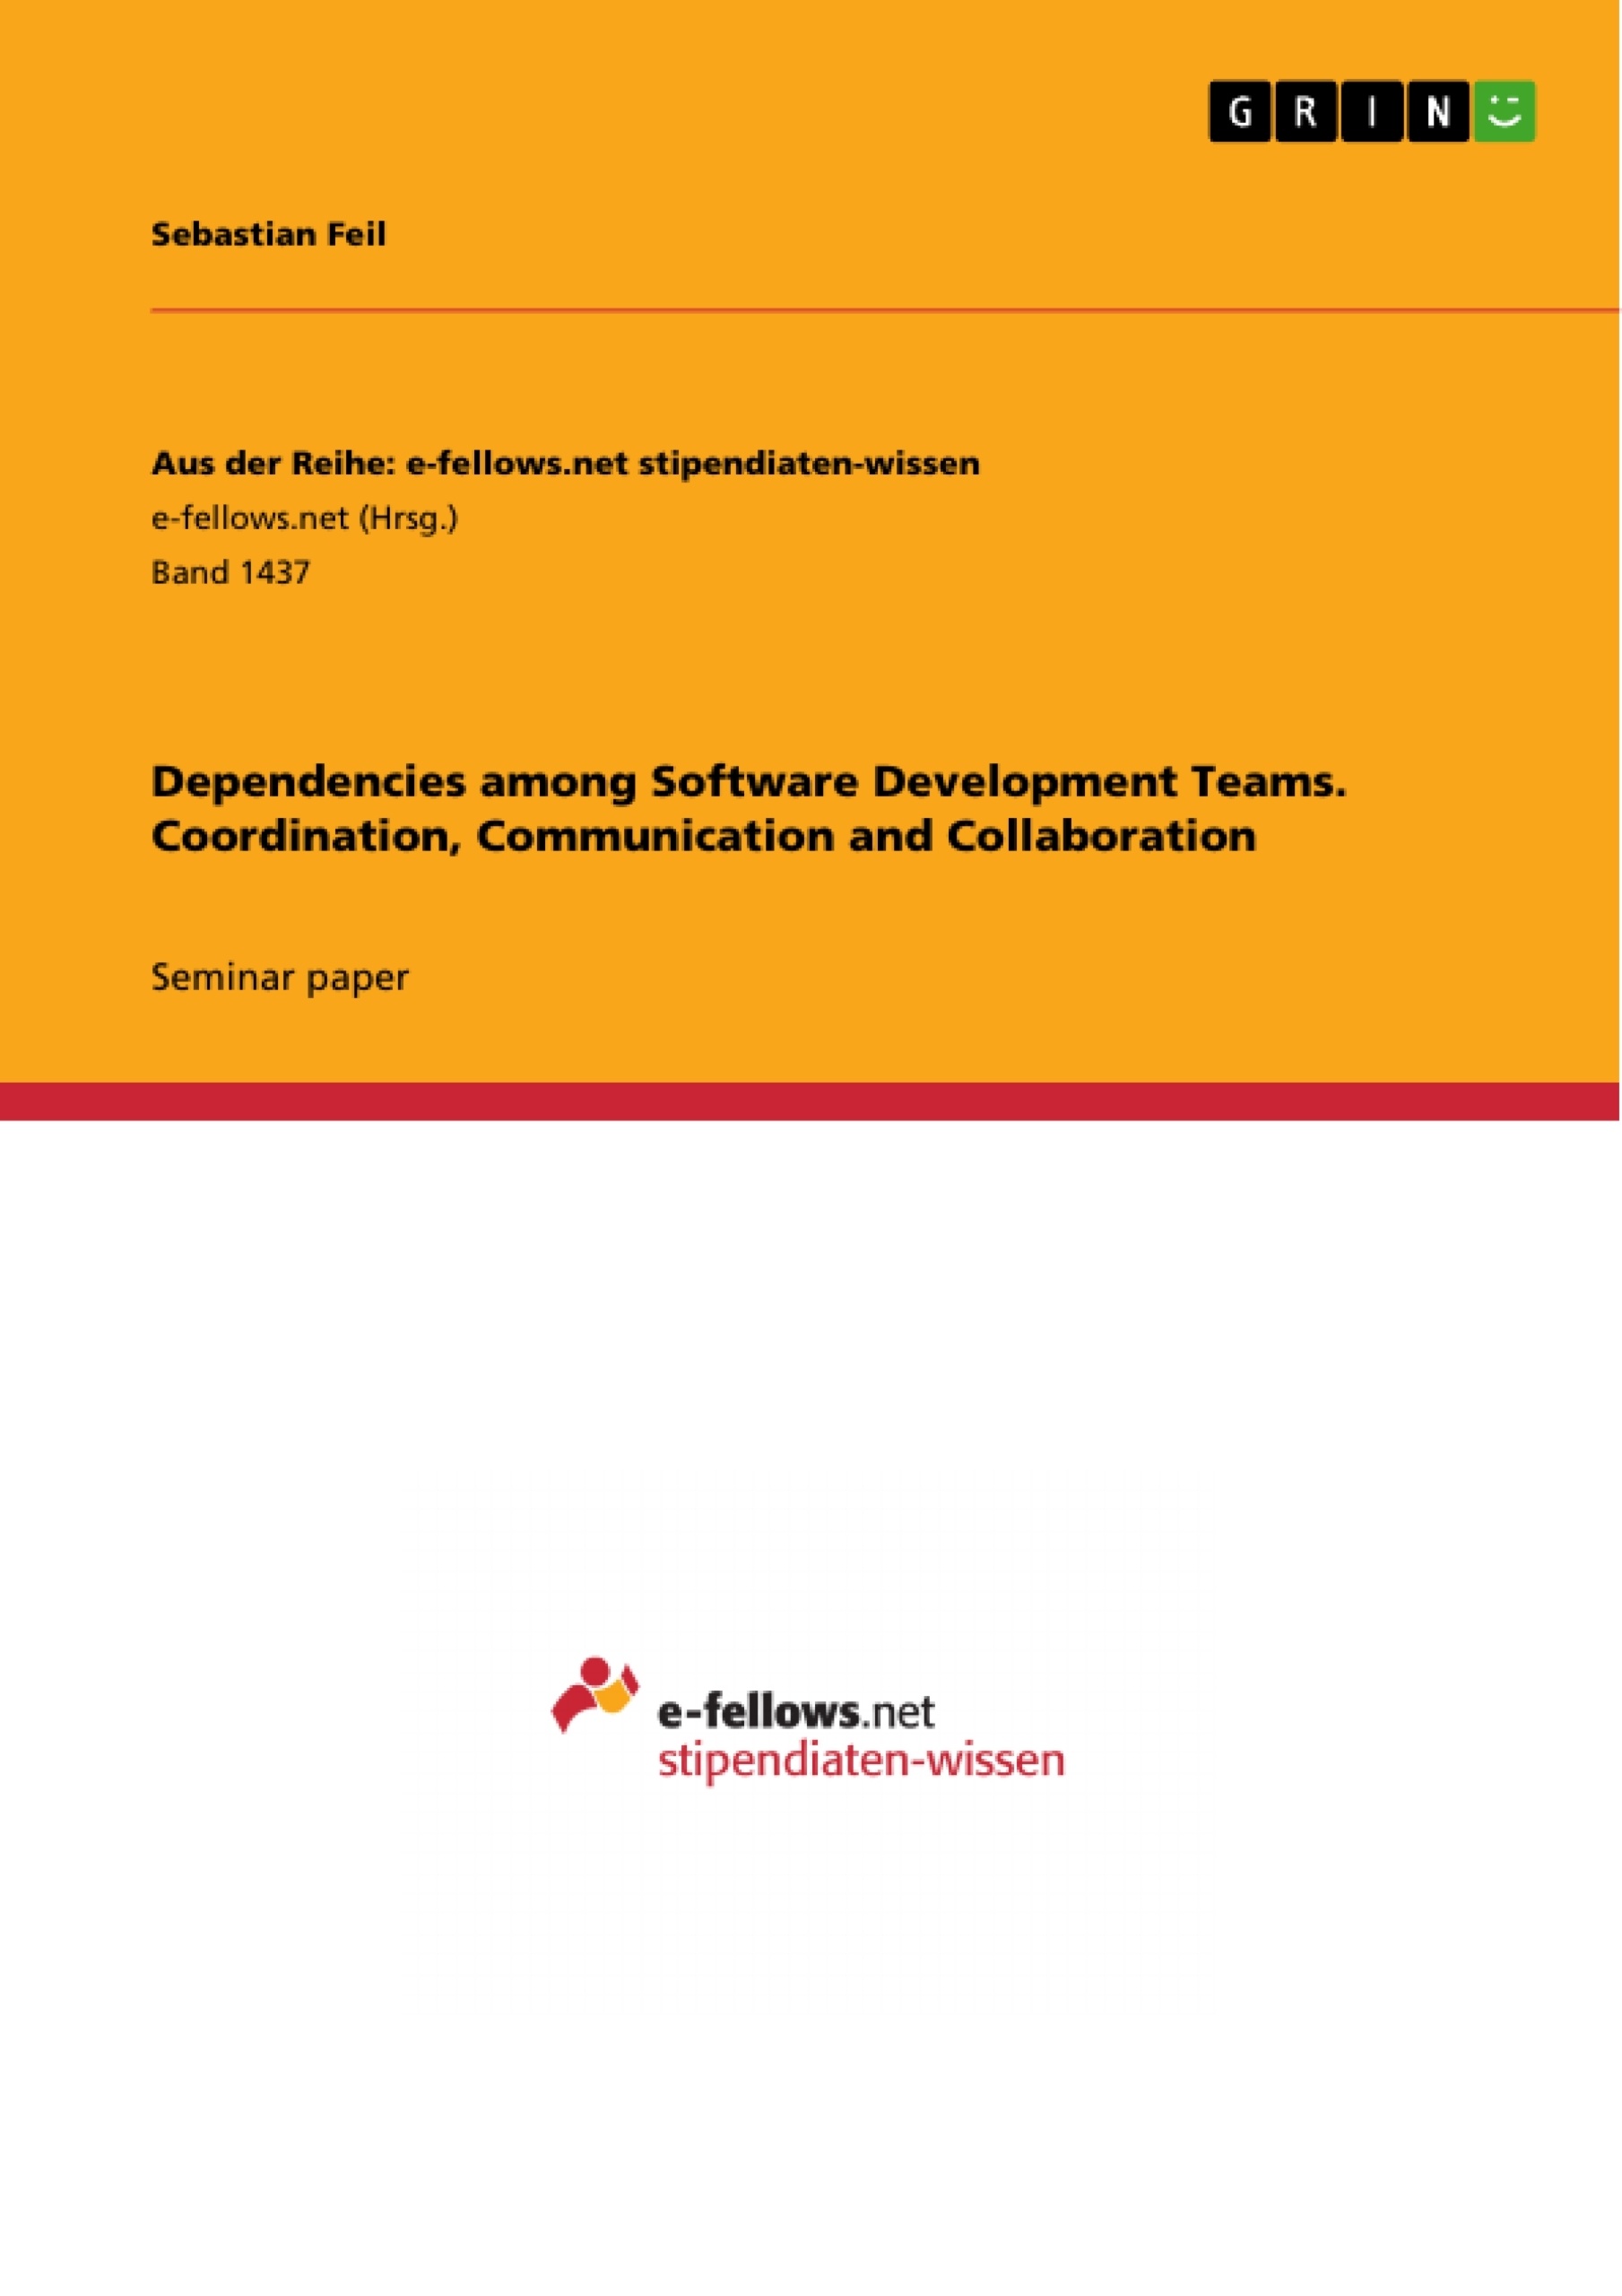 Title: Dependencies among Software Development Teams. Coordination, Communication and Collaboration